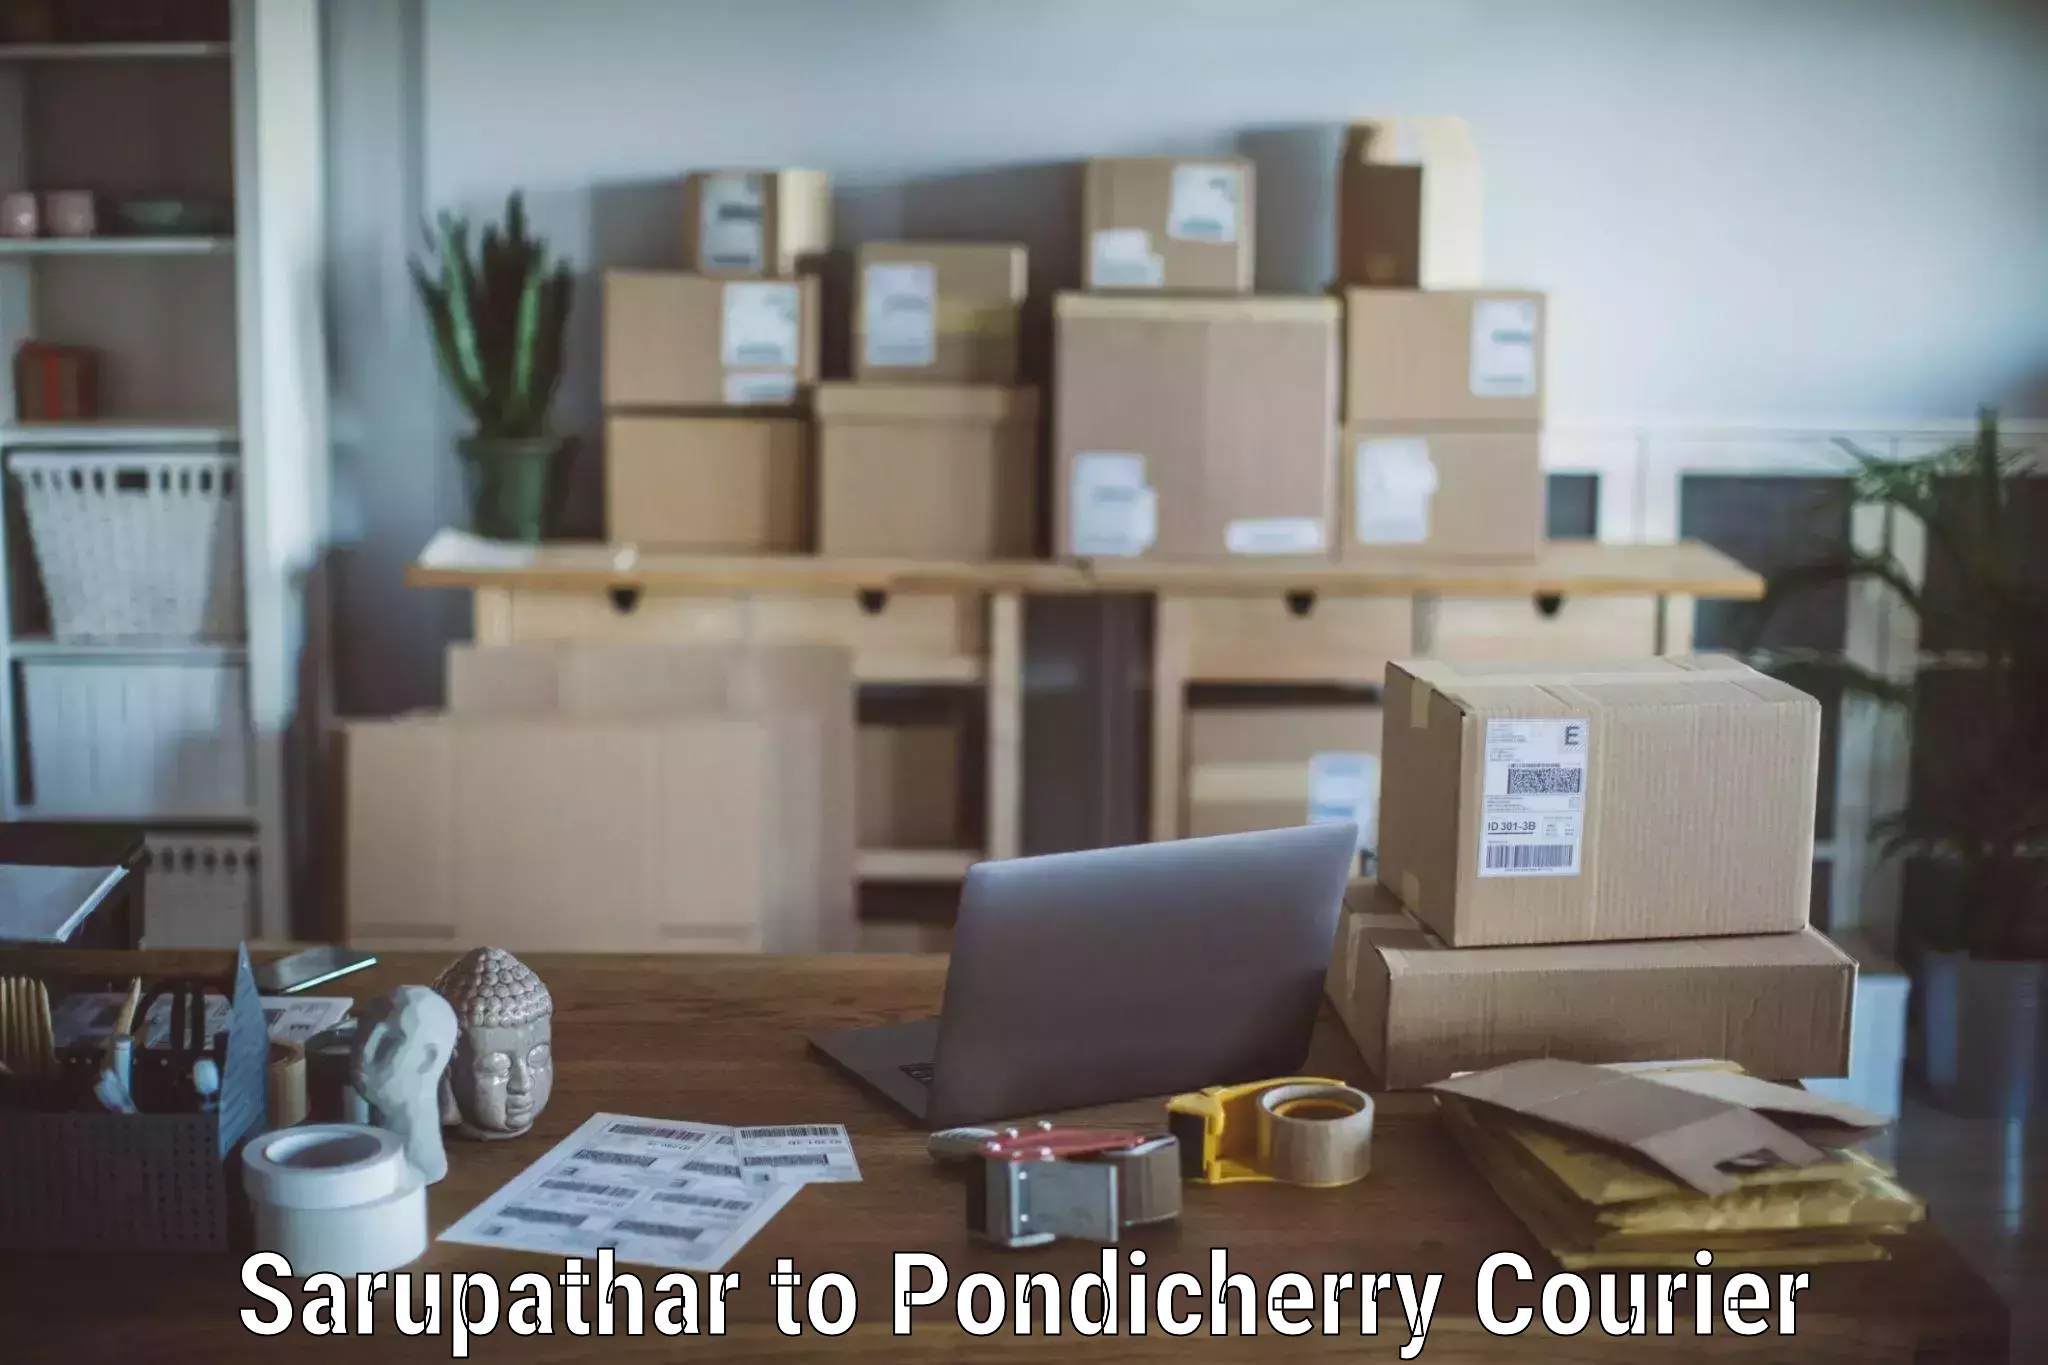 Trusted relocation experts Sarupathar to Pondicherry